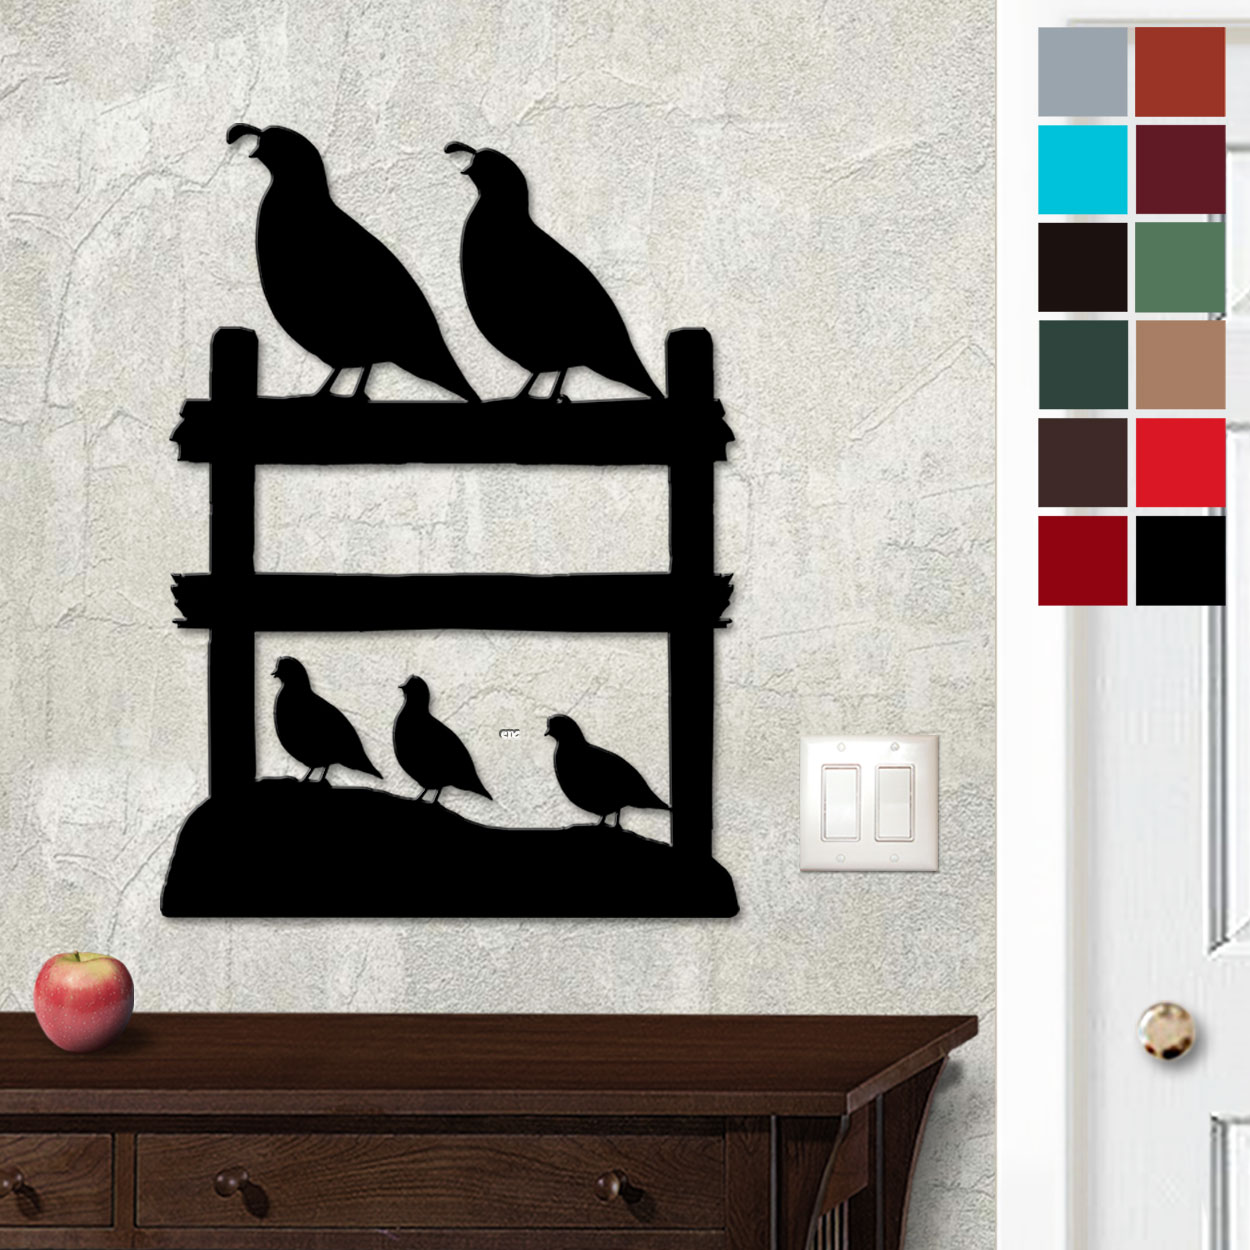 625417 - 18in or 24in Floating Metal Wall Art - Quail Fence - Choose Color